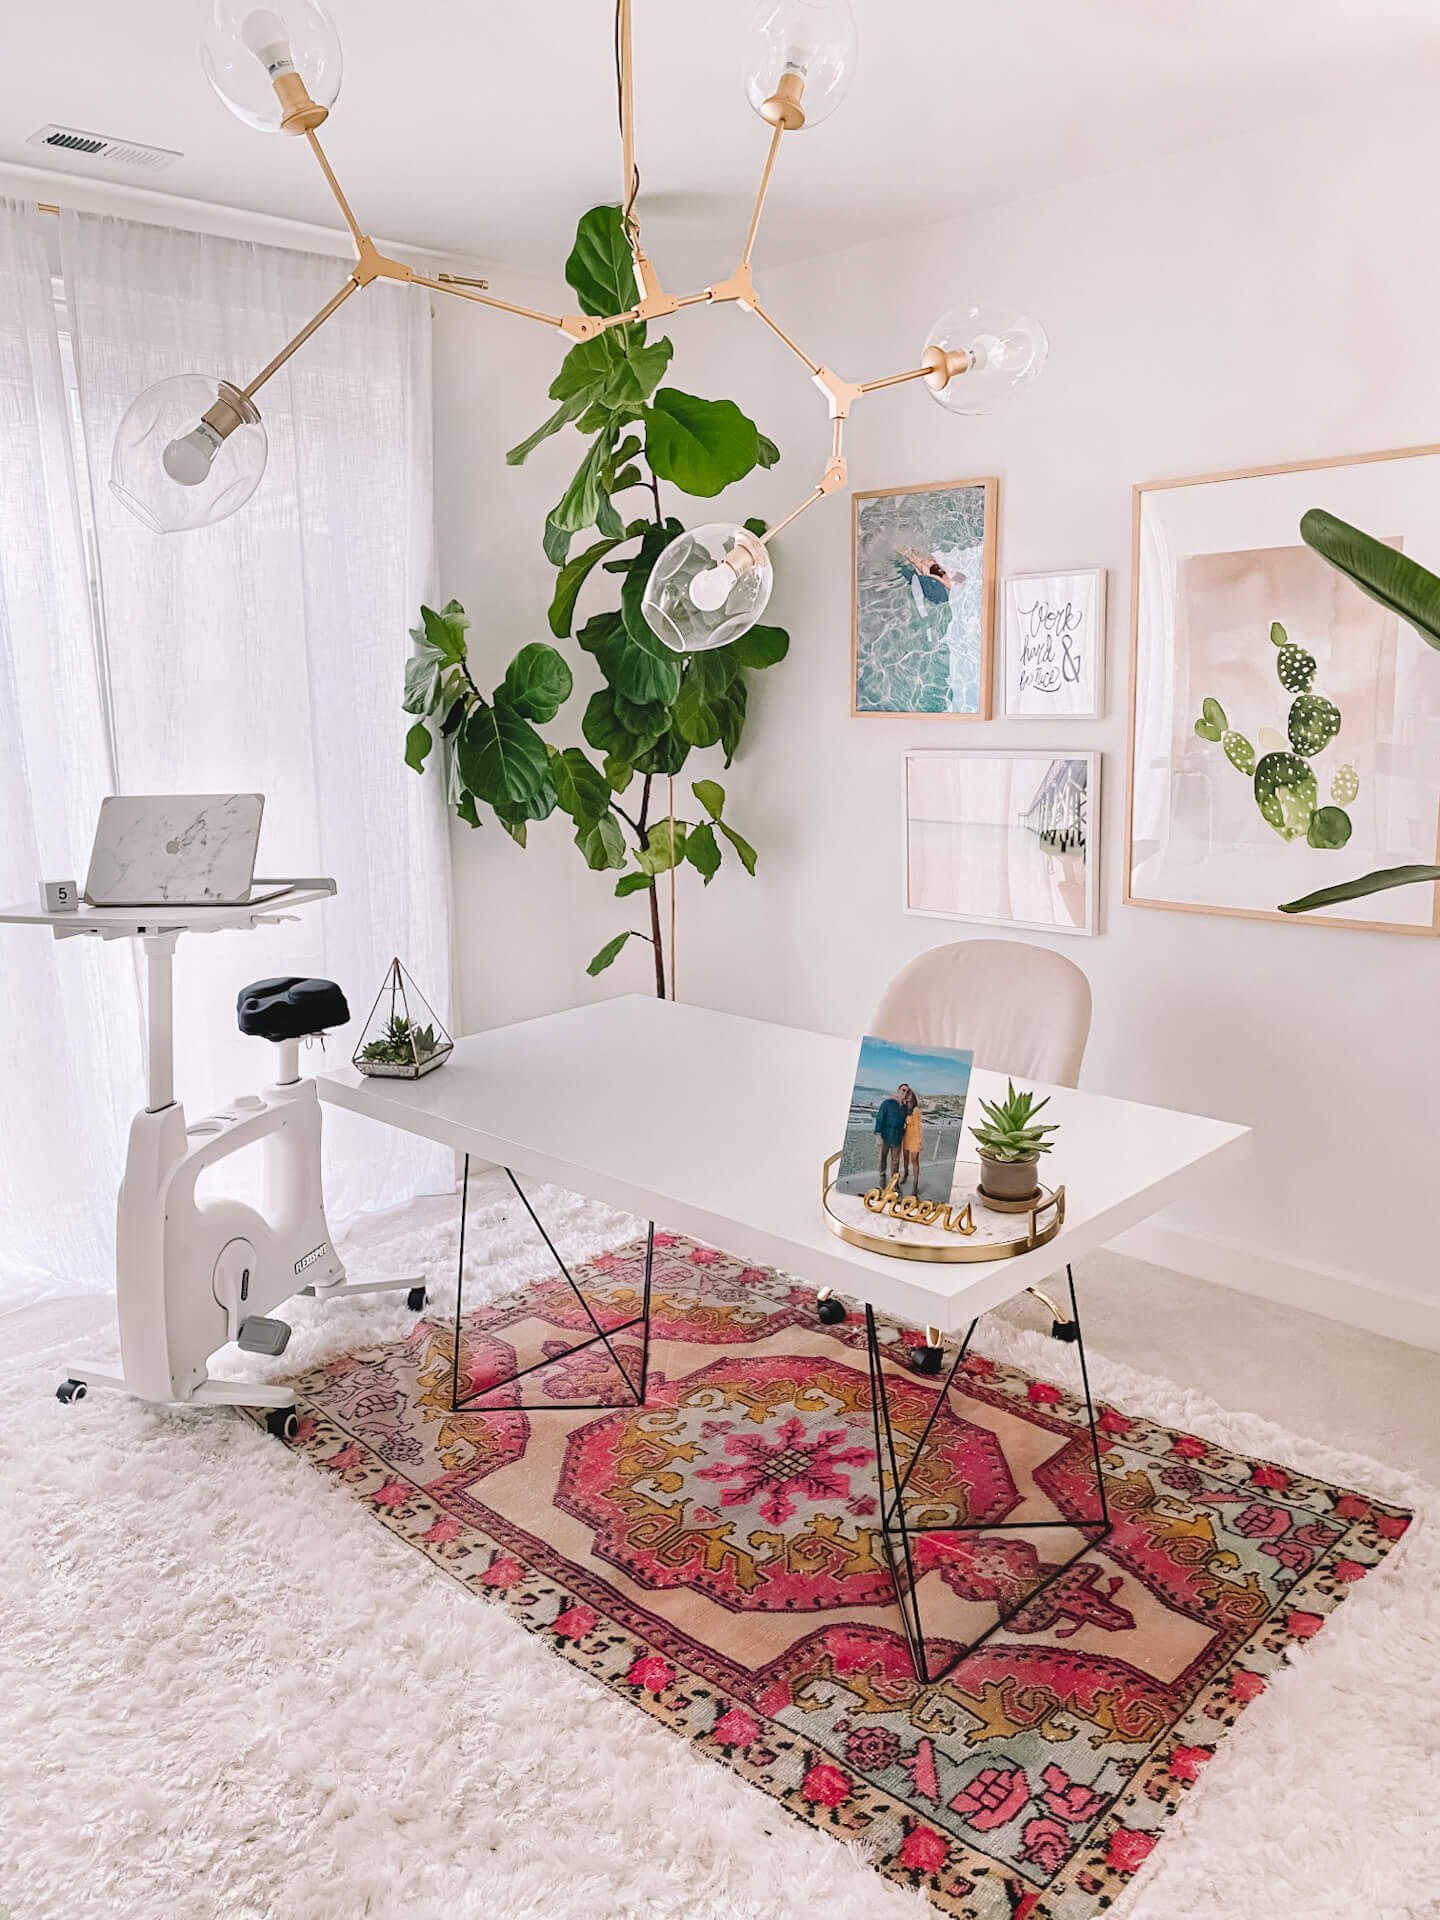 Home Office Setup Ideas for Every Work Style